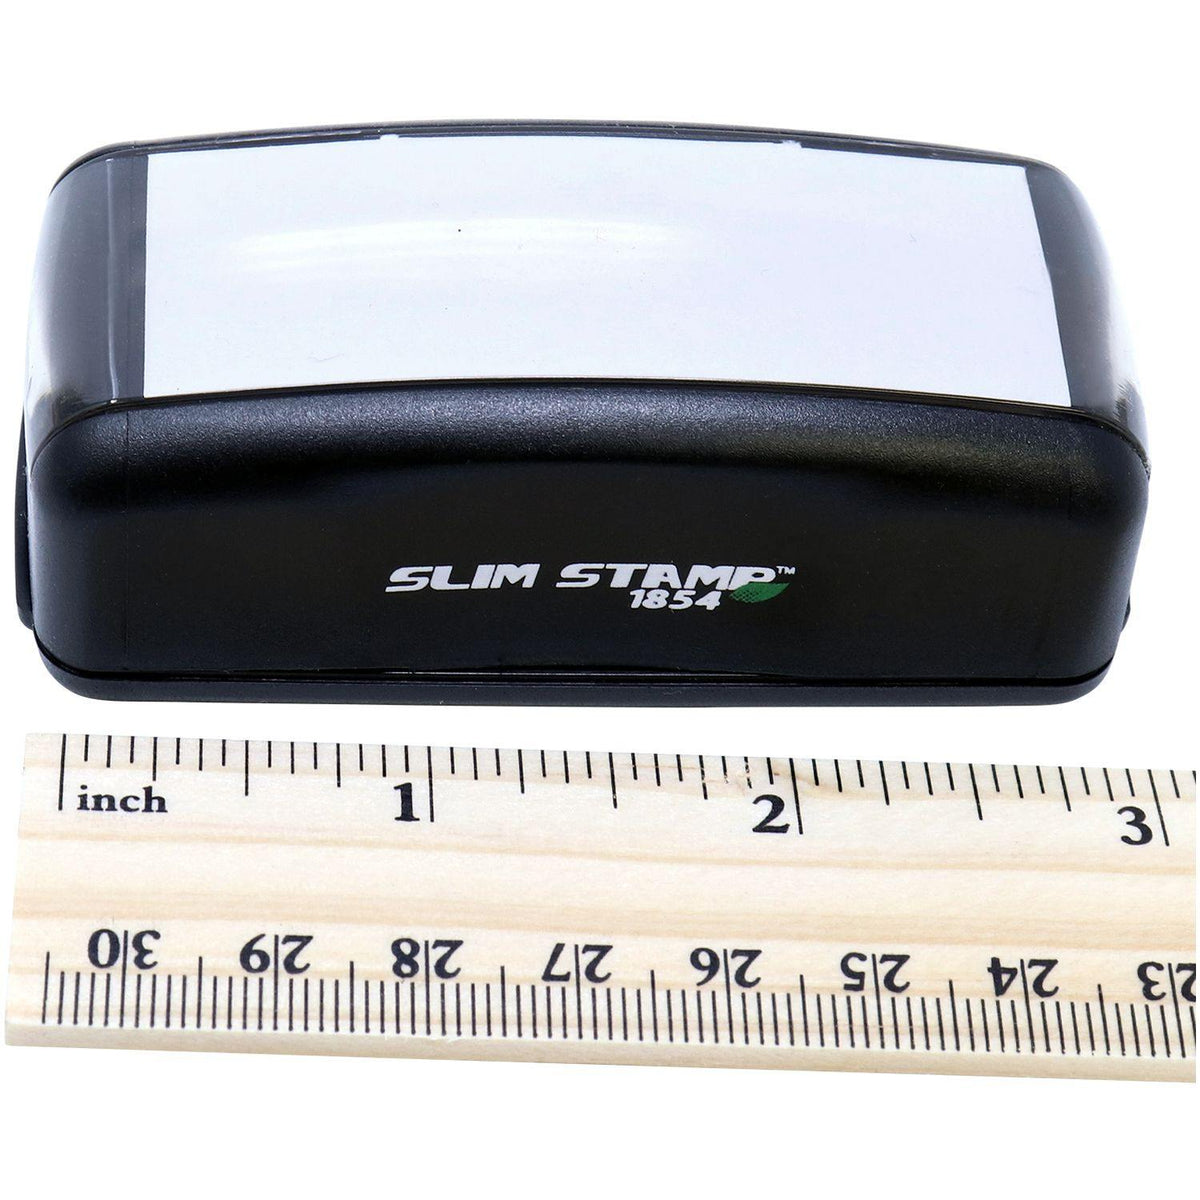 Measurement Large Pre Inked For Deposit Only Stamp with Ruler